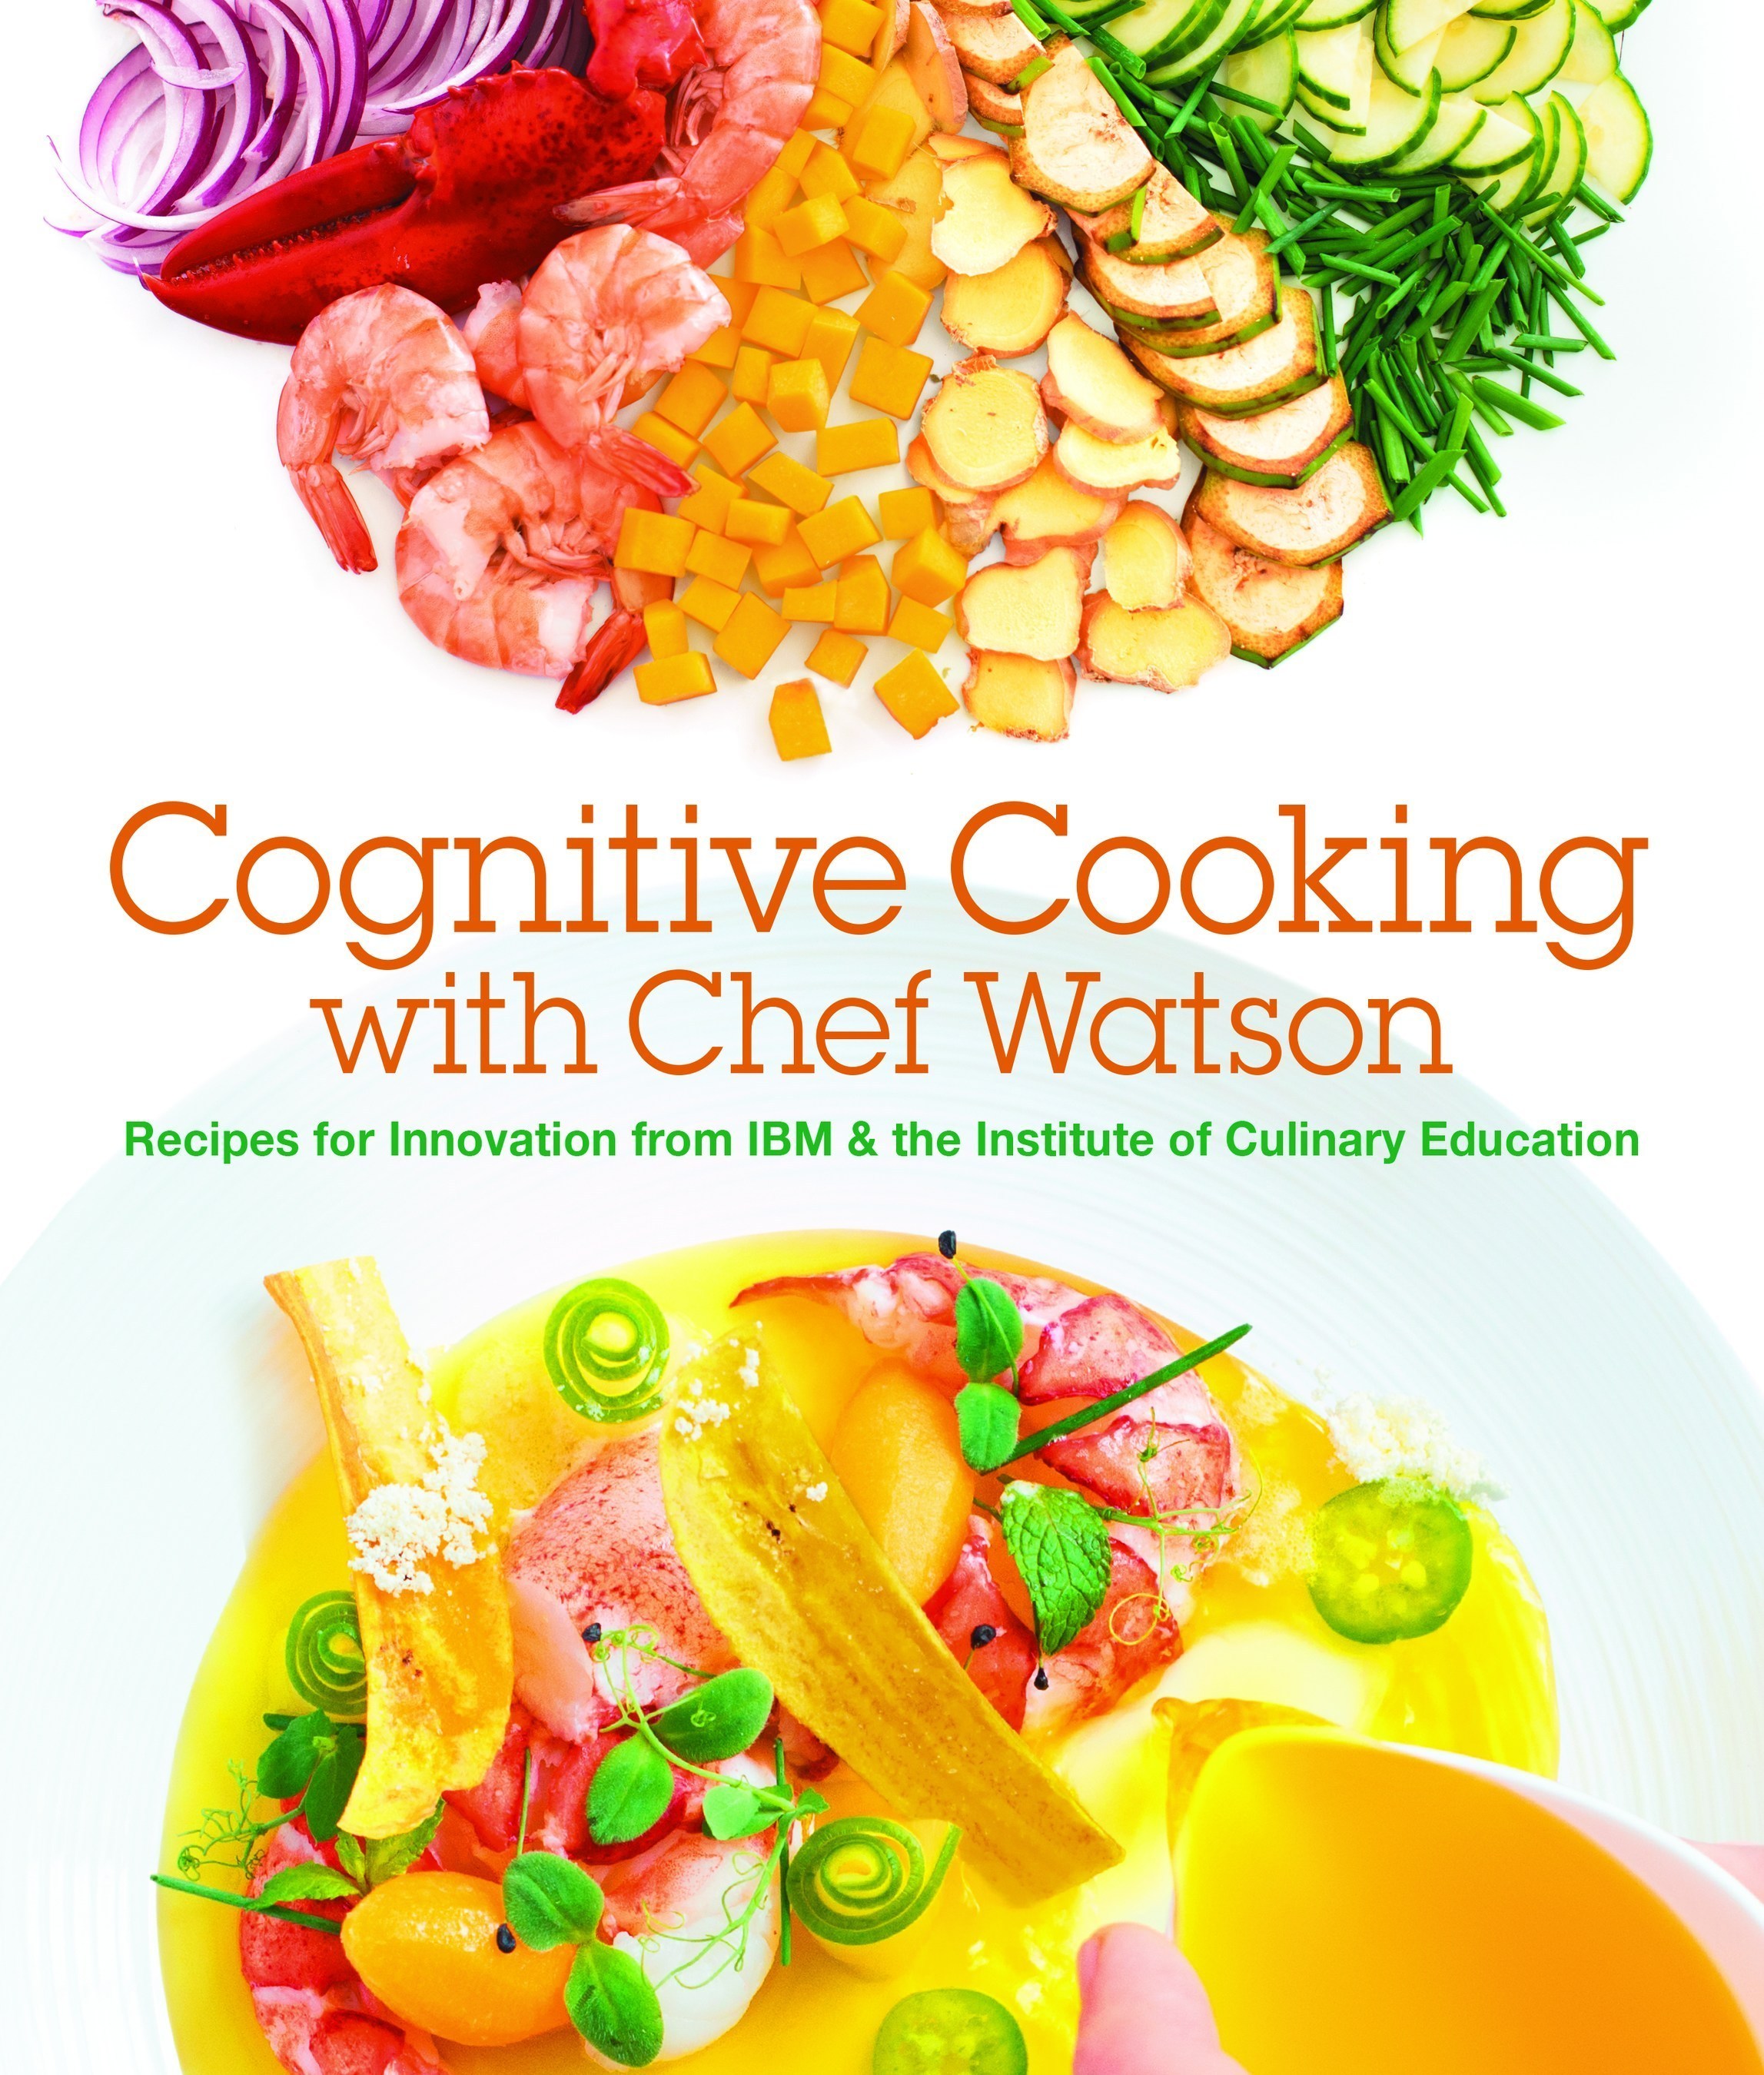 A Cookbook of Chef Watson-Inspired Recipes